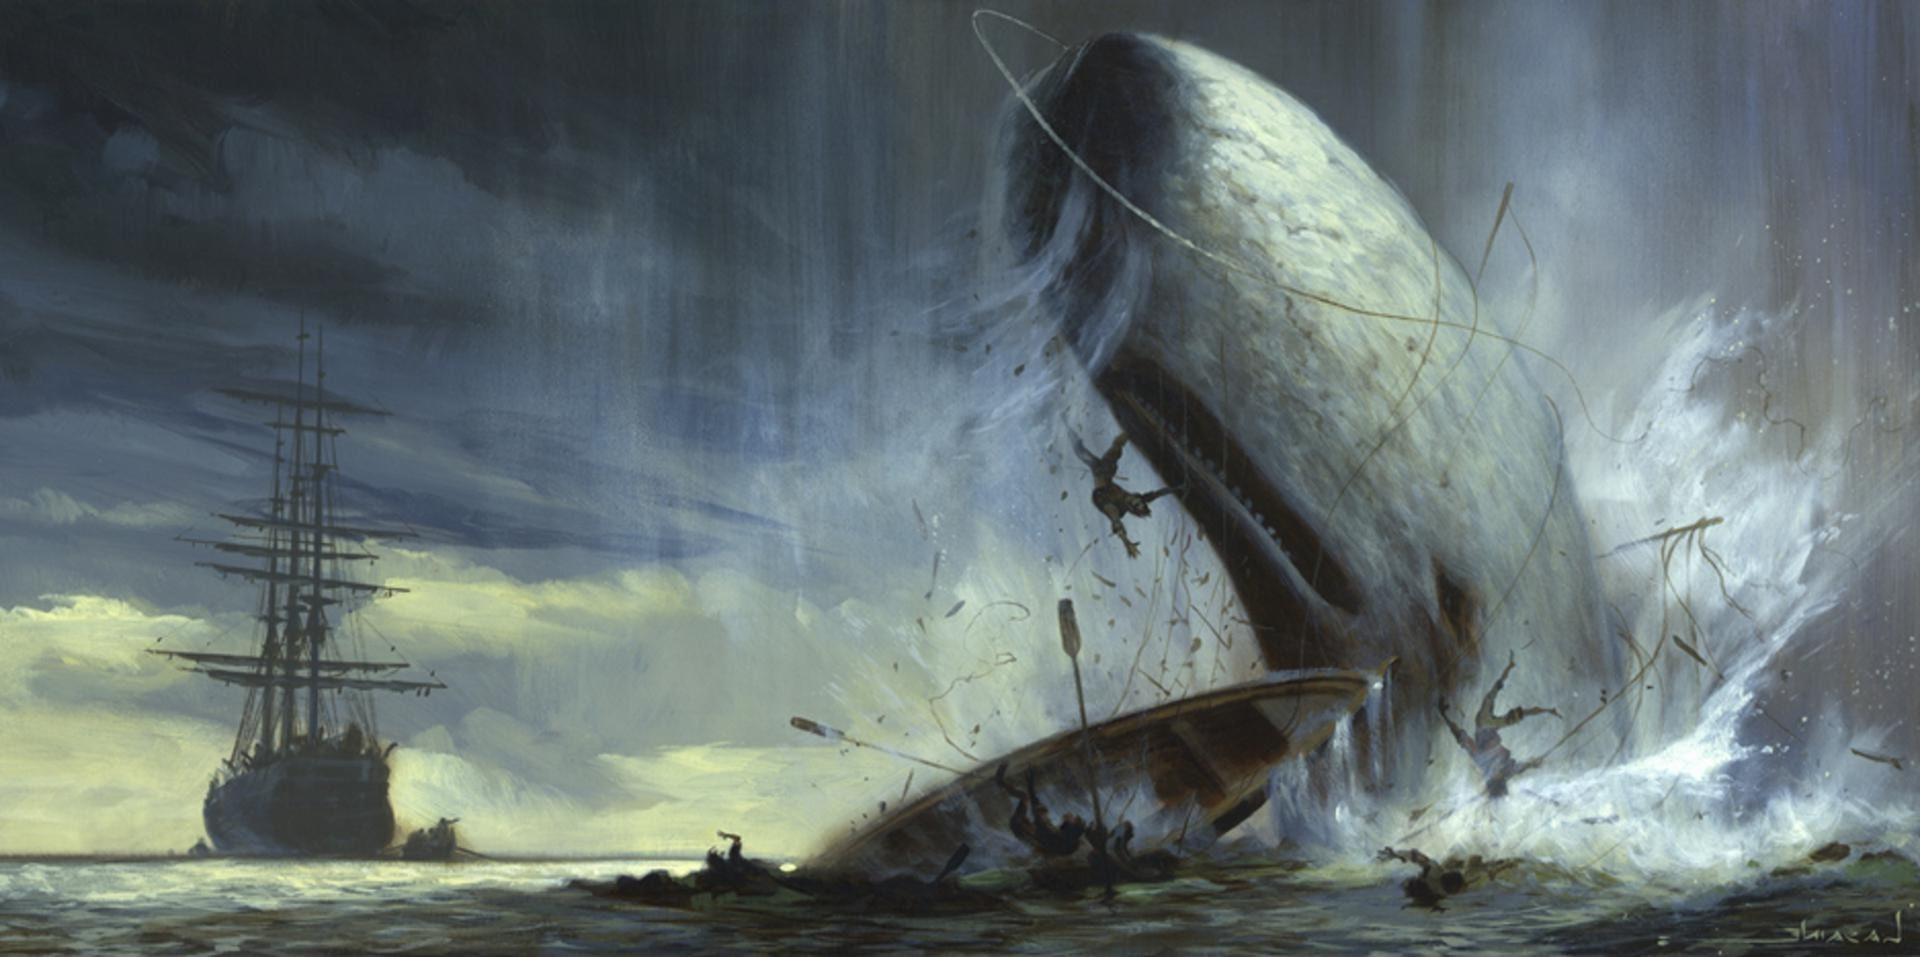 animals, artwork, boat, clouds, Fighting, men, Moby Dick, nature